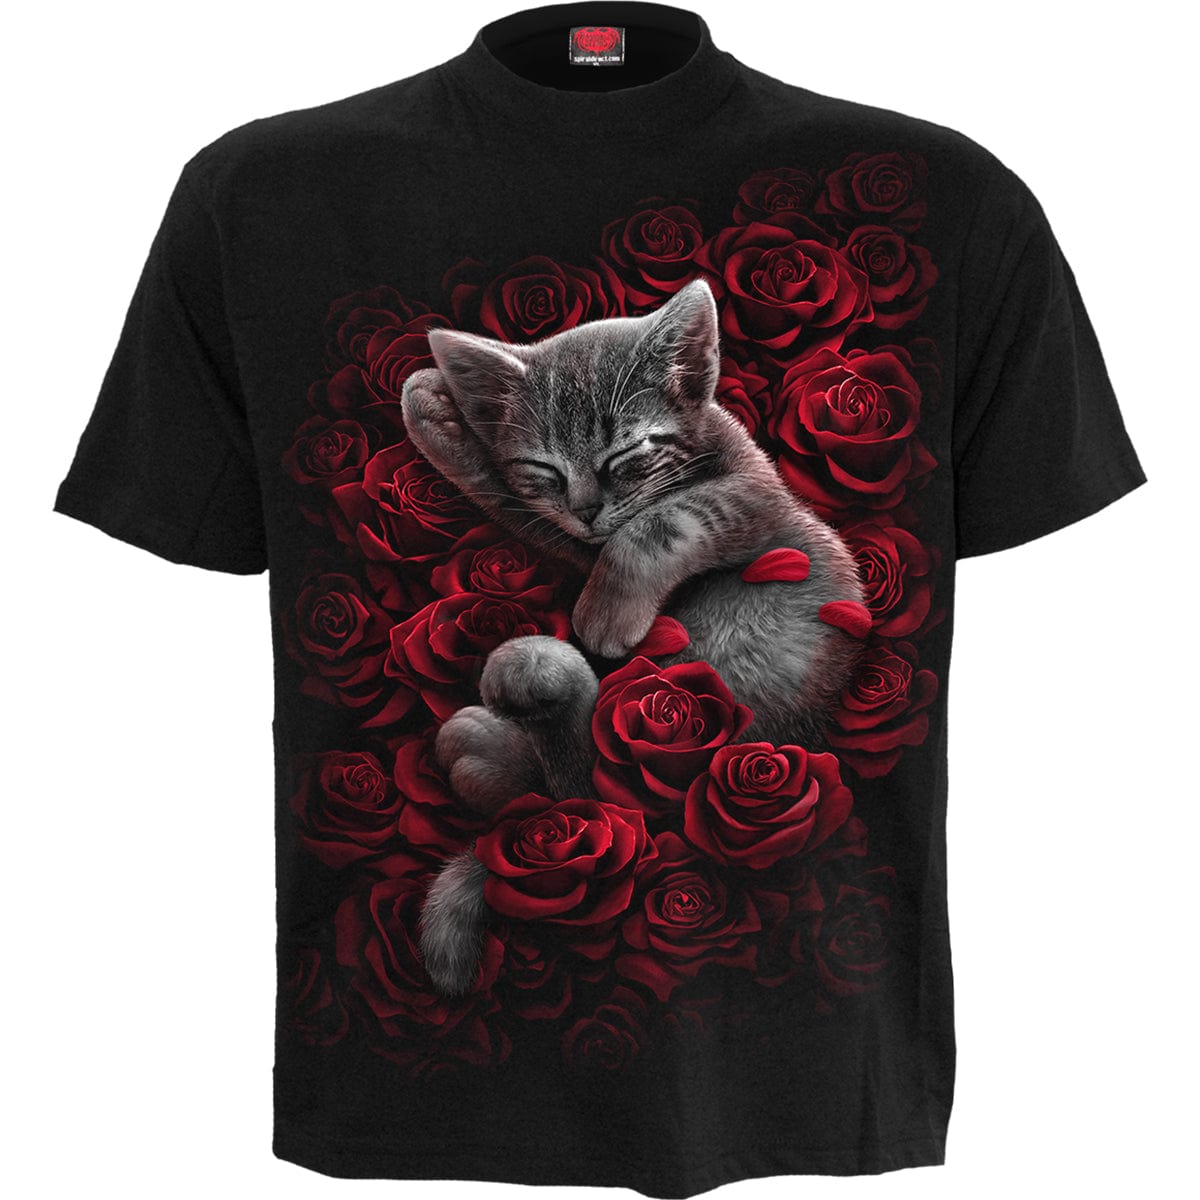 BED OF ROSES - Front Print T-Shirt Black